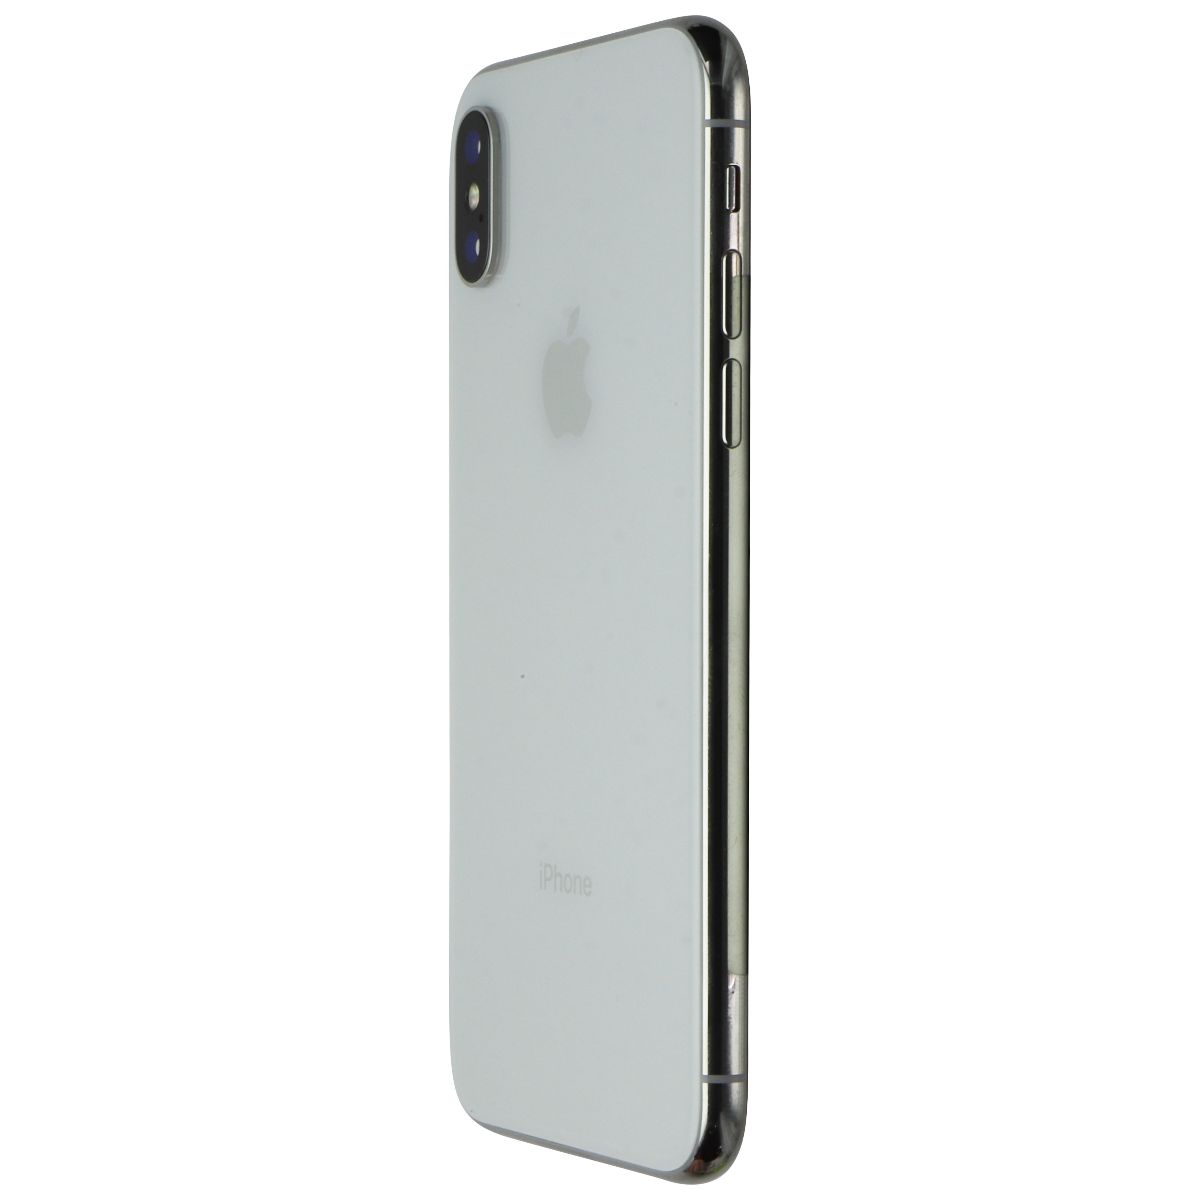 Apple iPhone X (5.8-inch) Smartphone (A1865) Unlocked - 256GB / Silver Cell Phones & Smartphones Apple    - Simple Cell Bulk Wholesale Pricing - USA Seller